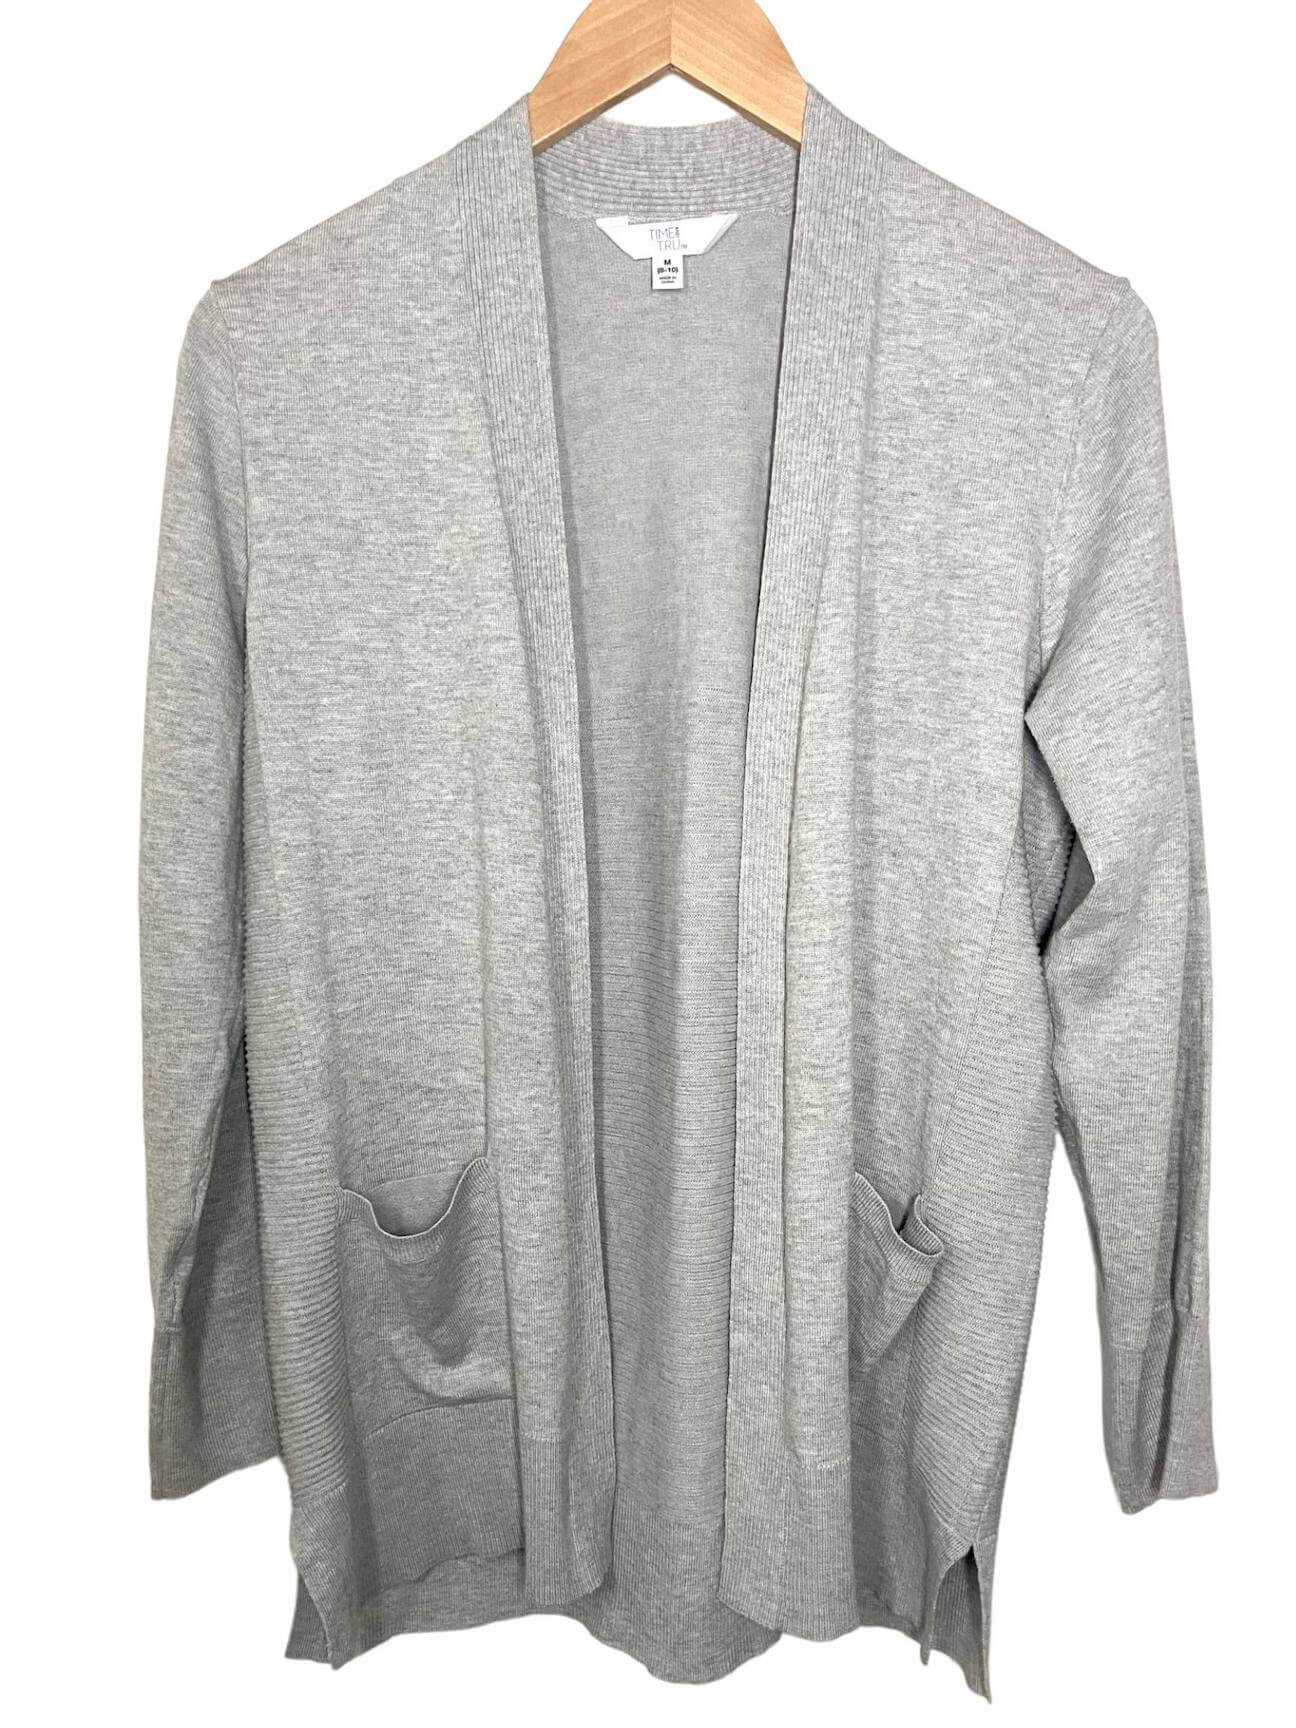 Light Summer TIME AND TRU gray open cardigan sweater